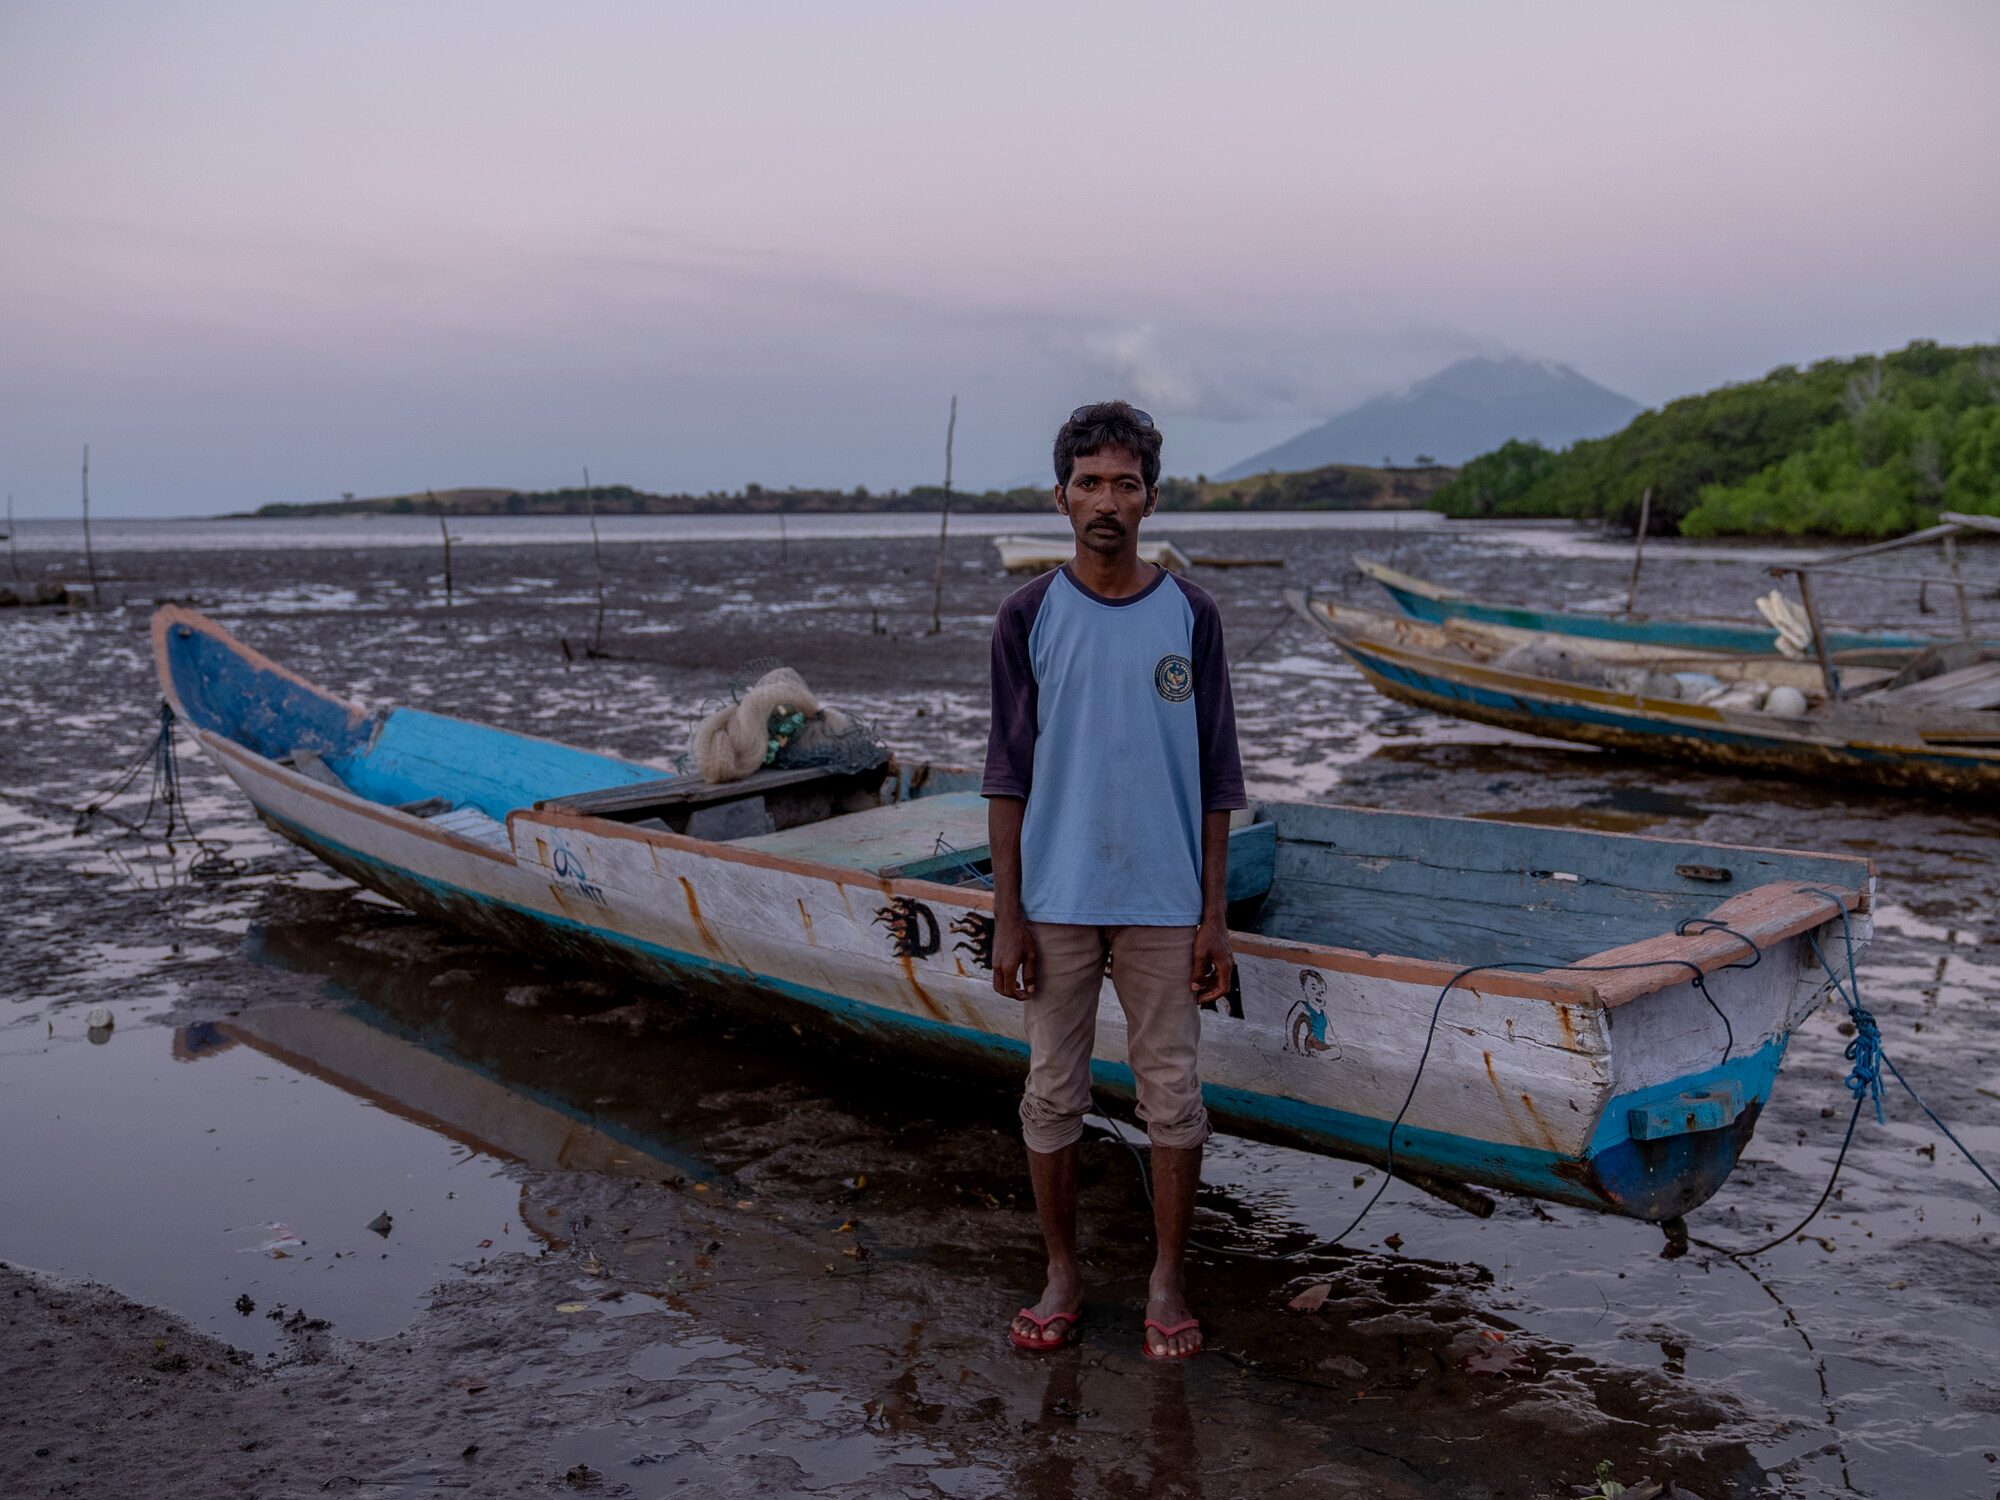 Mekko, Indonesia: Said (33) stands in front of his fishing boat. He now struggles to catch enough fish for his family's daily needs, due to climate change and the fish moving further and further out to sea. Photo: Vikram Sombu/Oxfam. Oxfam acknowledges the support of the Australian Government through the Australian NGO Cooperation Program (ANCP)